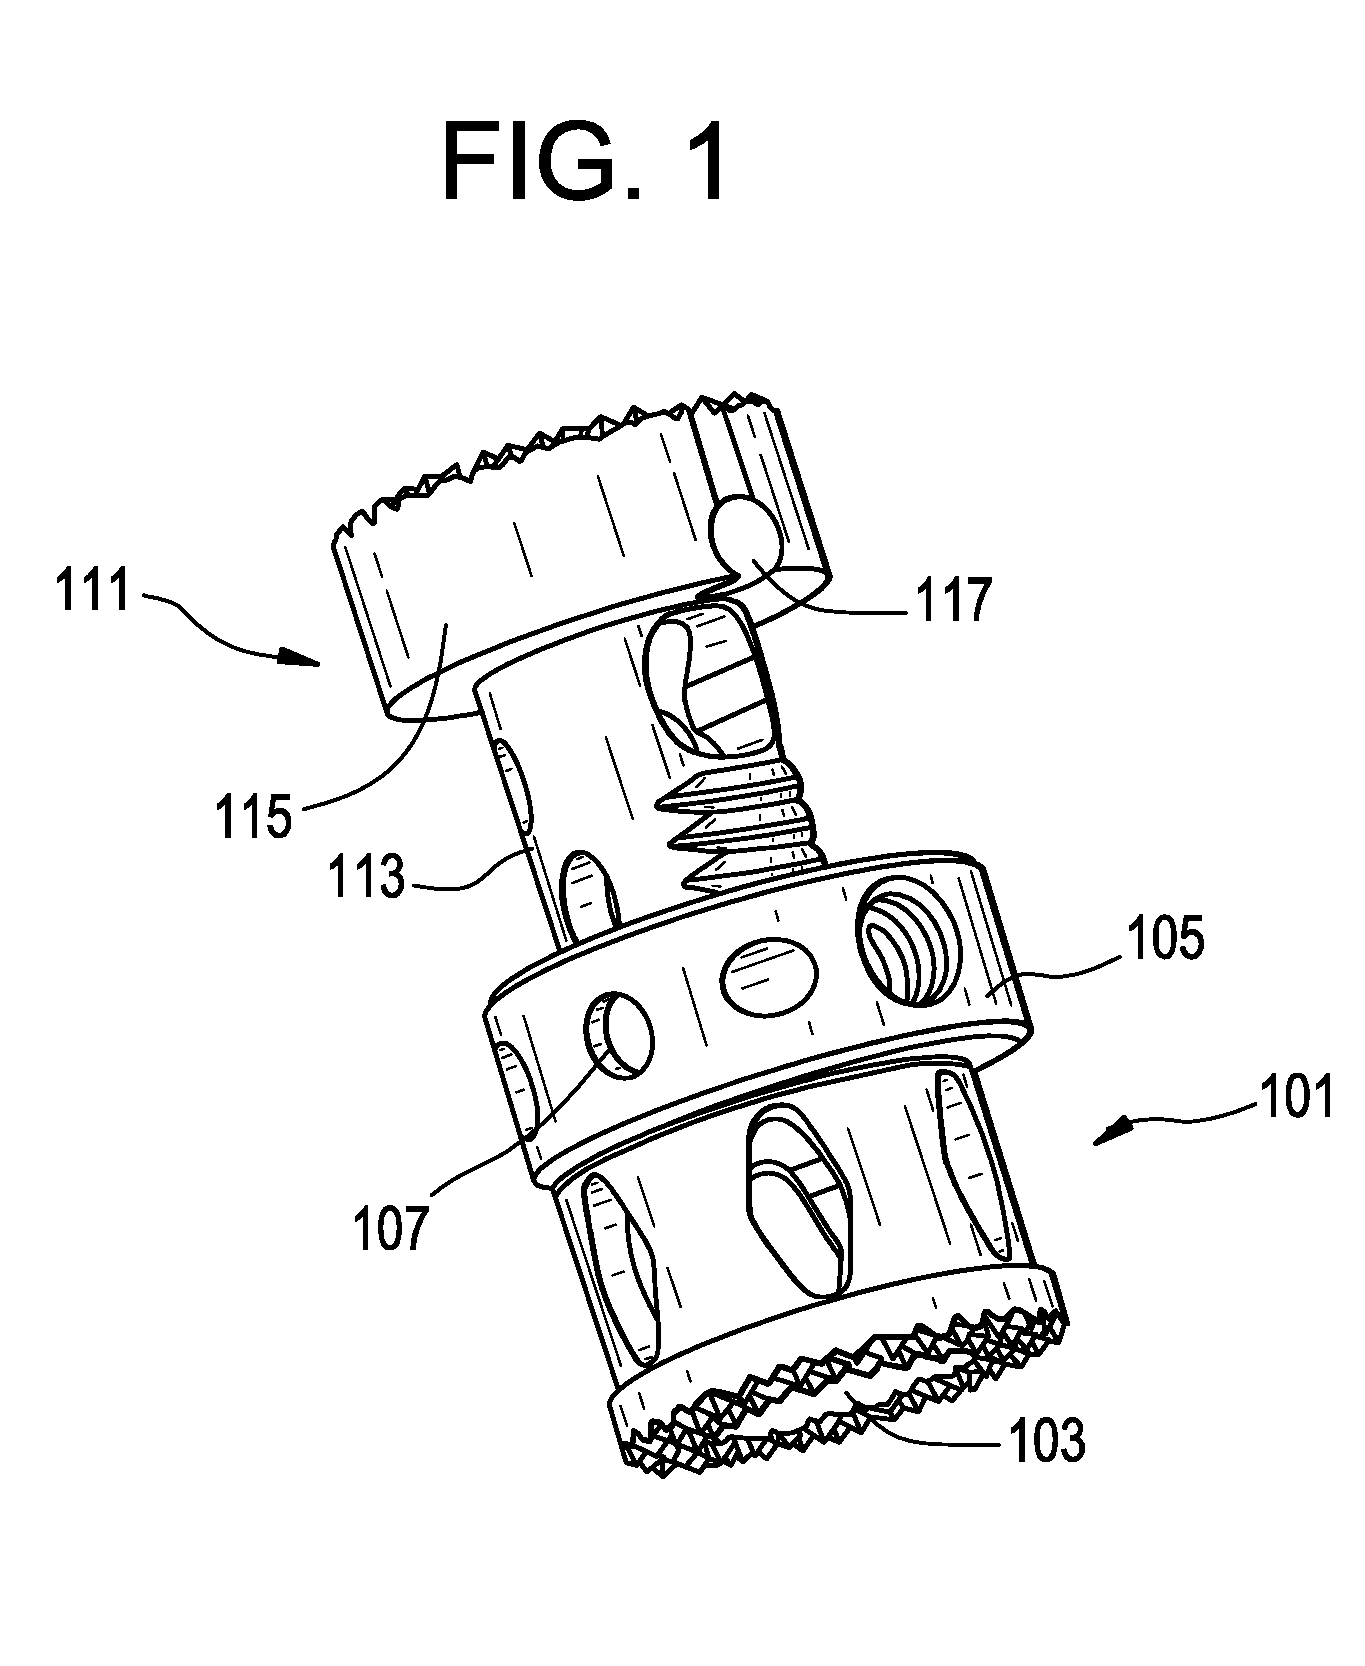 Minimally invasive corpectomy cage and instrument